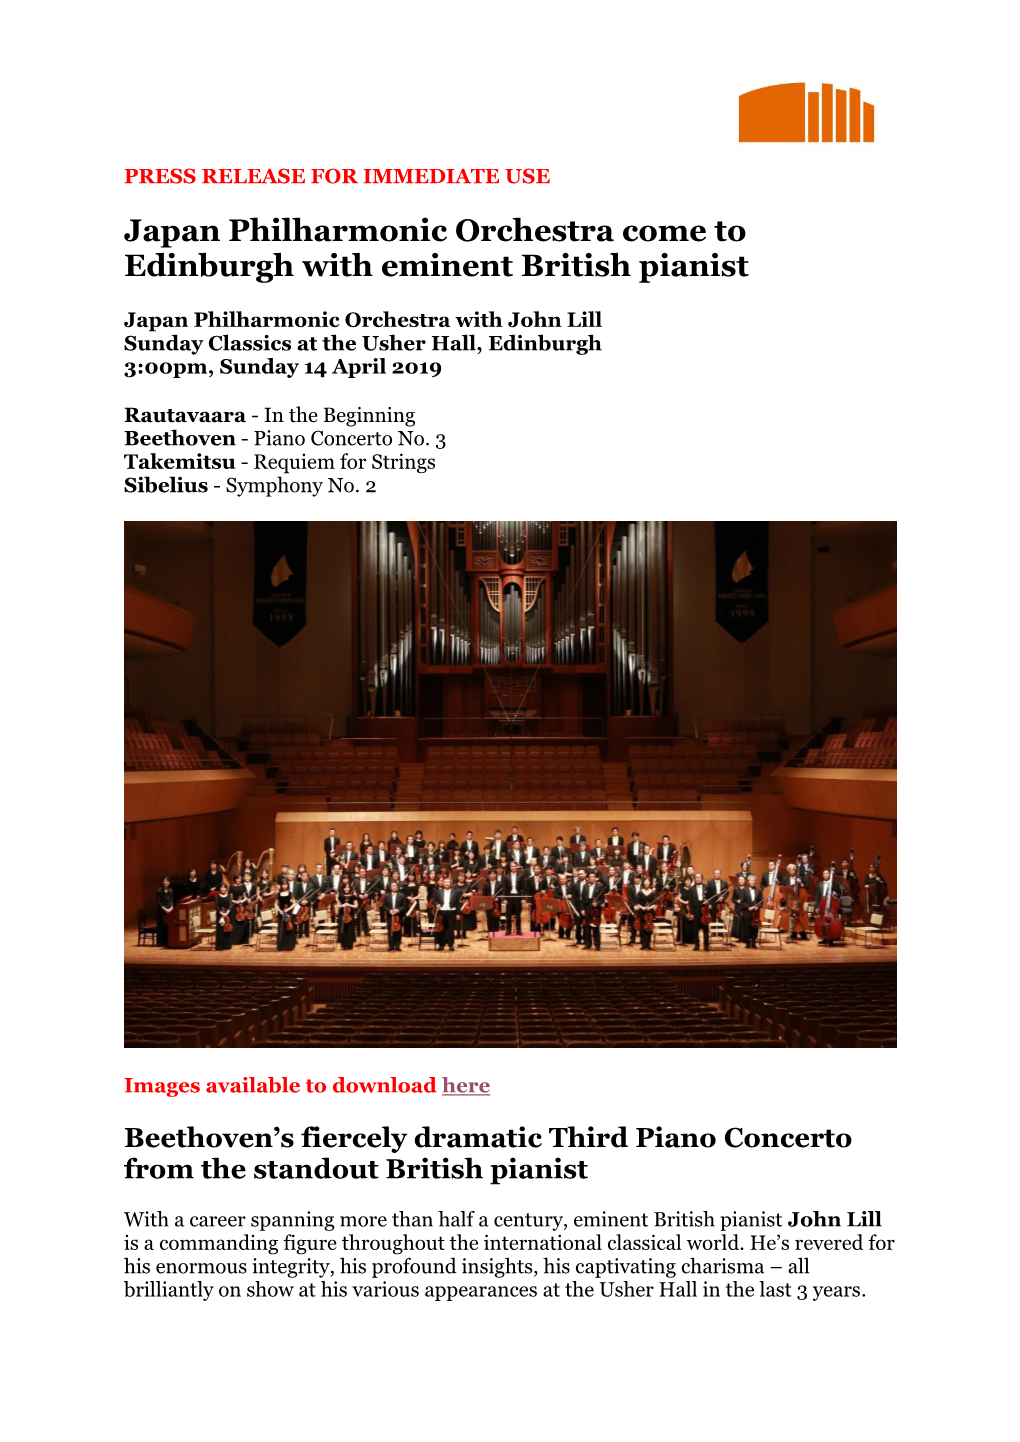 Japan Philharmonic Orchestra Come to Edinburgh with Eminent British Pianist